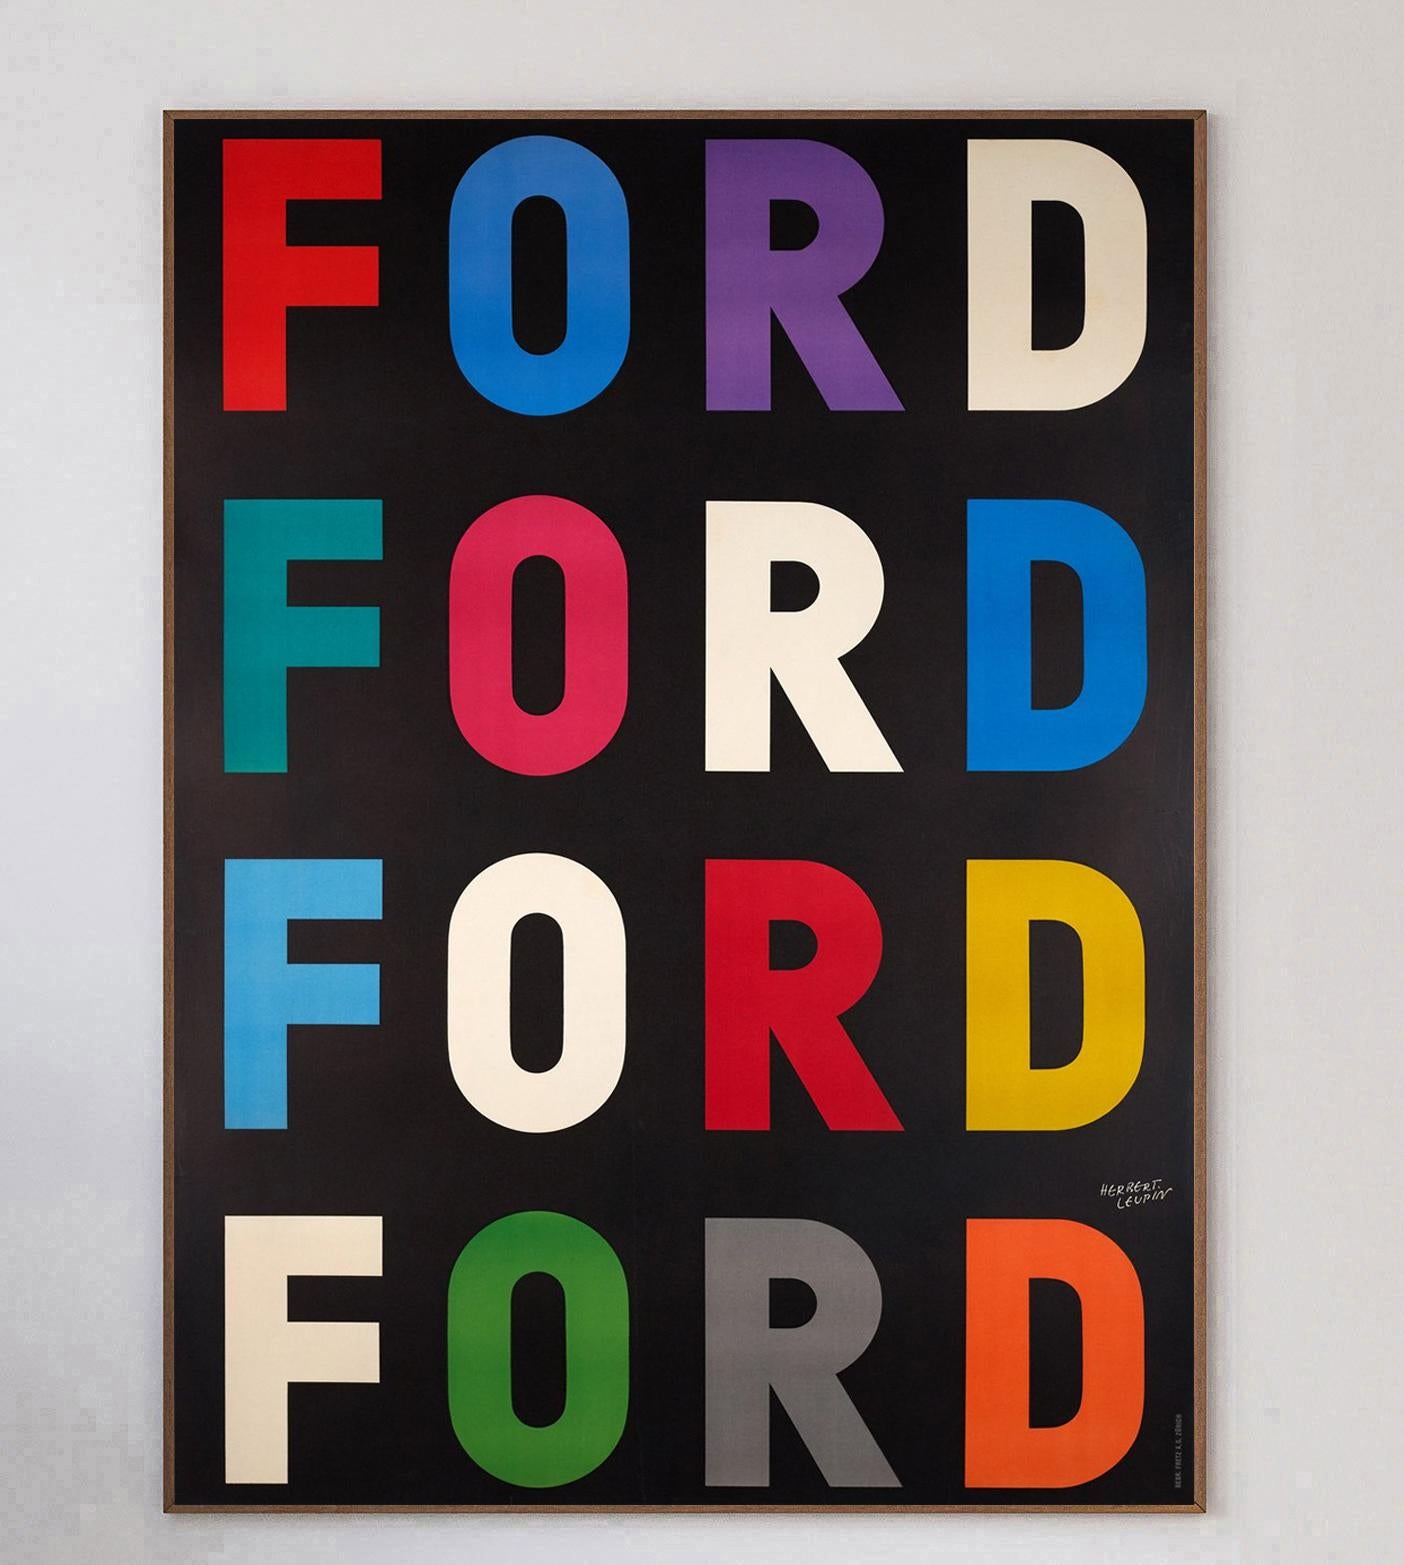 Beautiful poster printed in lithography with artwork from Swiss graphic designer & artist Herbert Leupin created for Ford. Ford Motor Company was founded by Henry Ford in 1903 and continues to be one of the worlds largest automakers. 

This